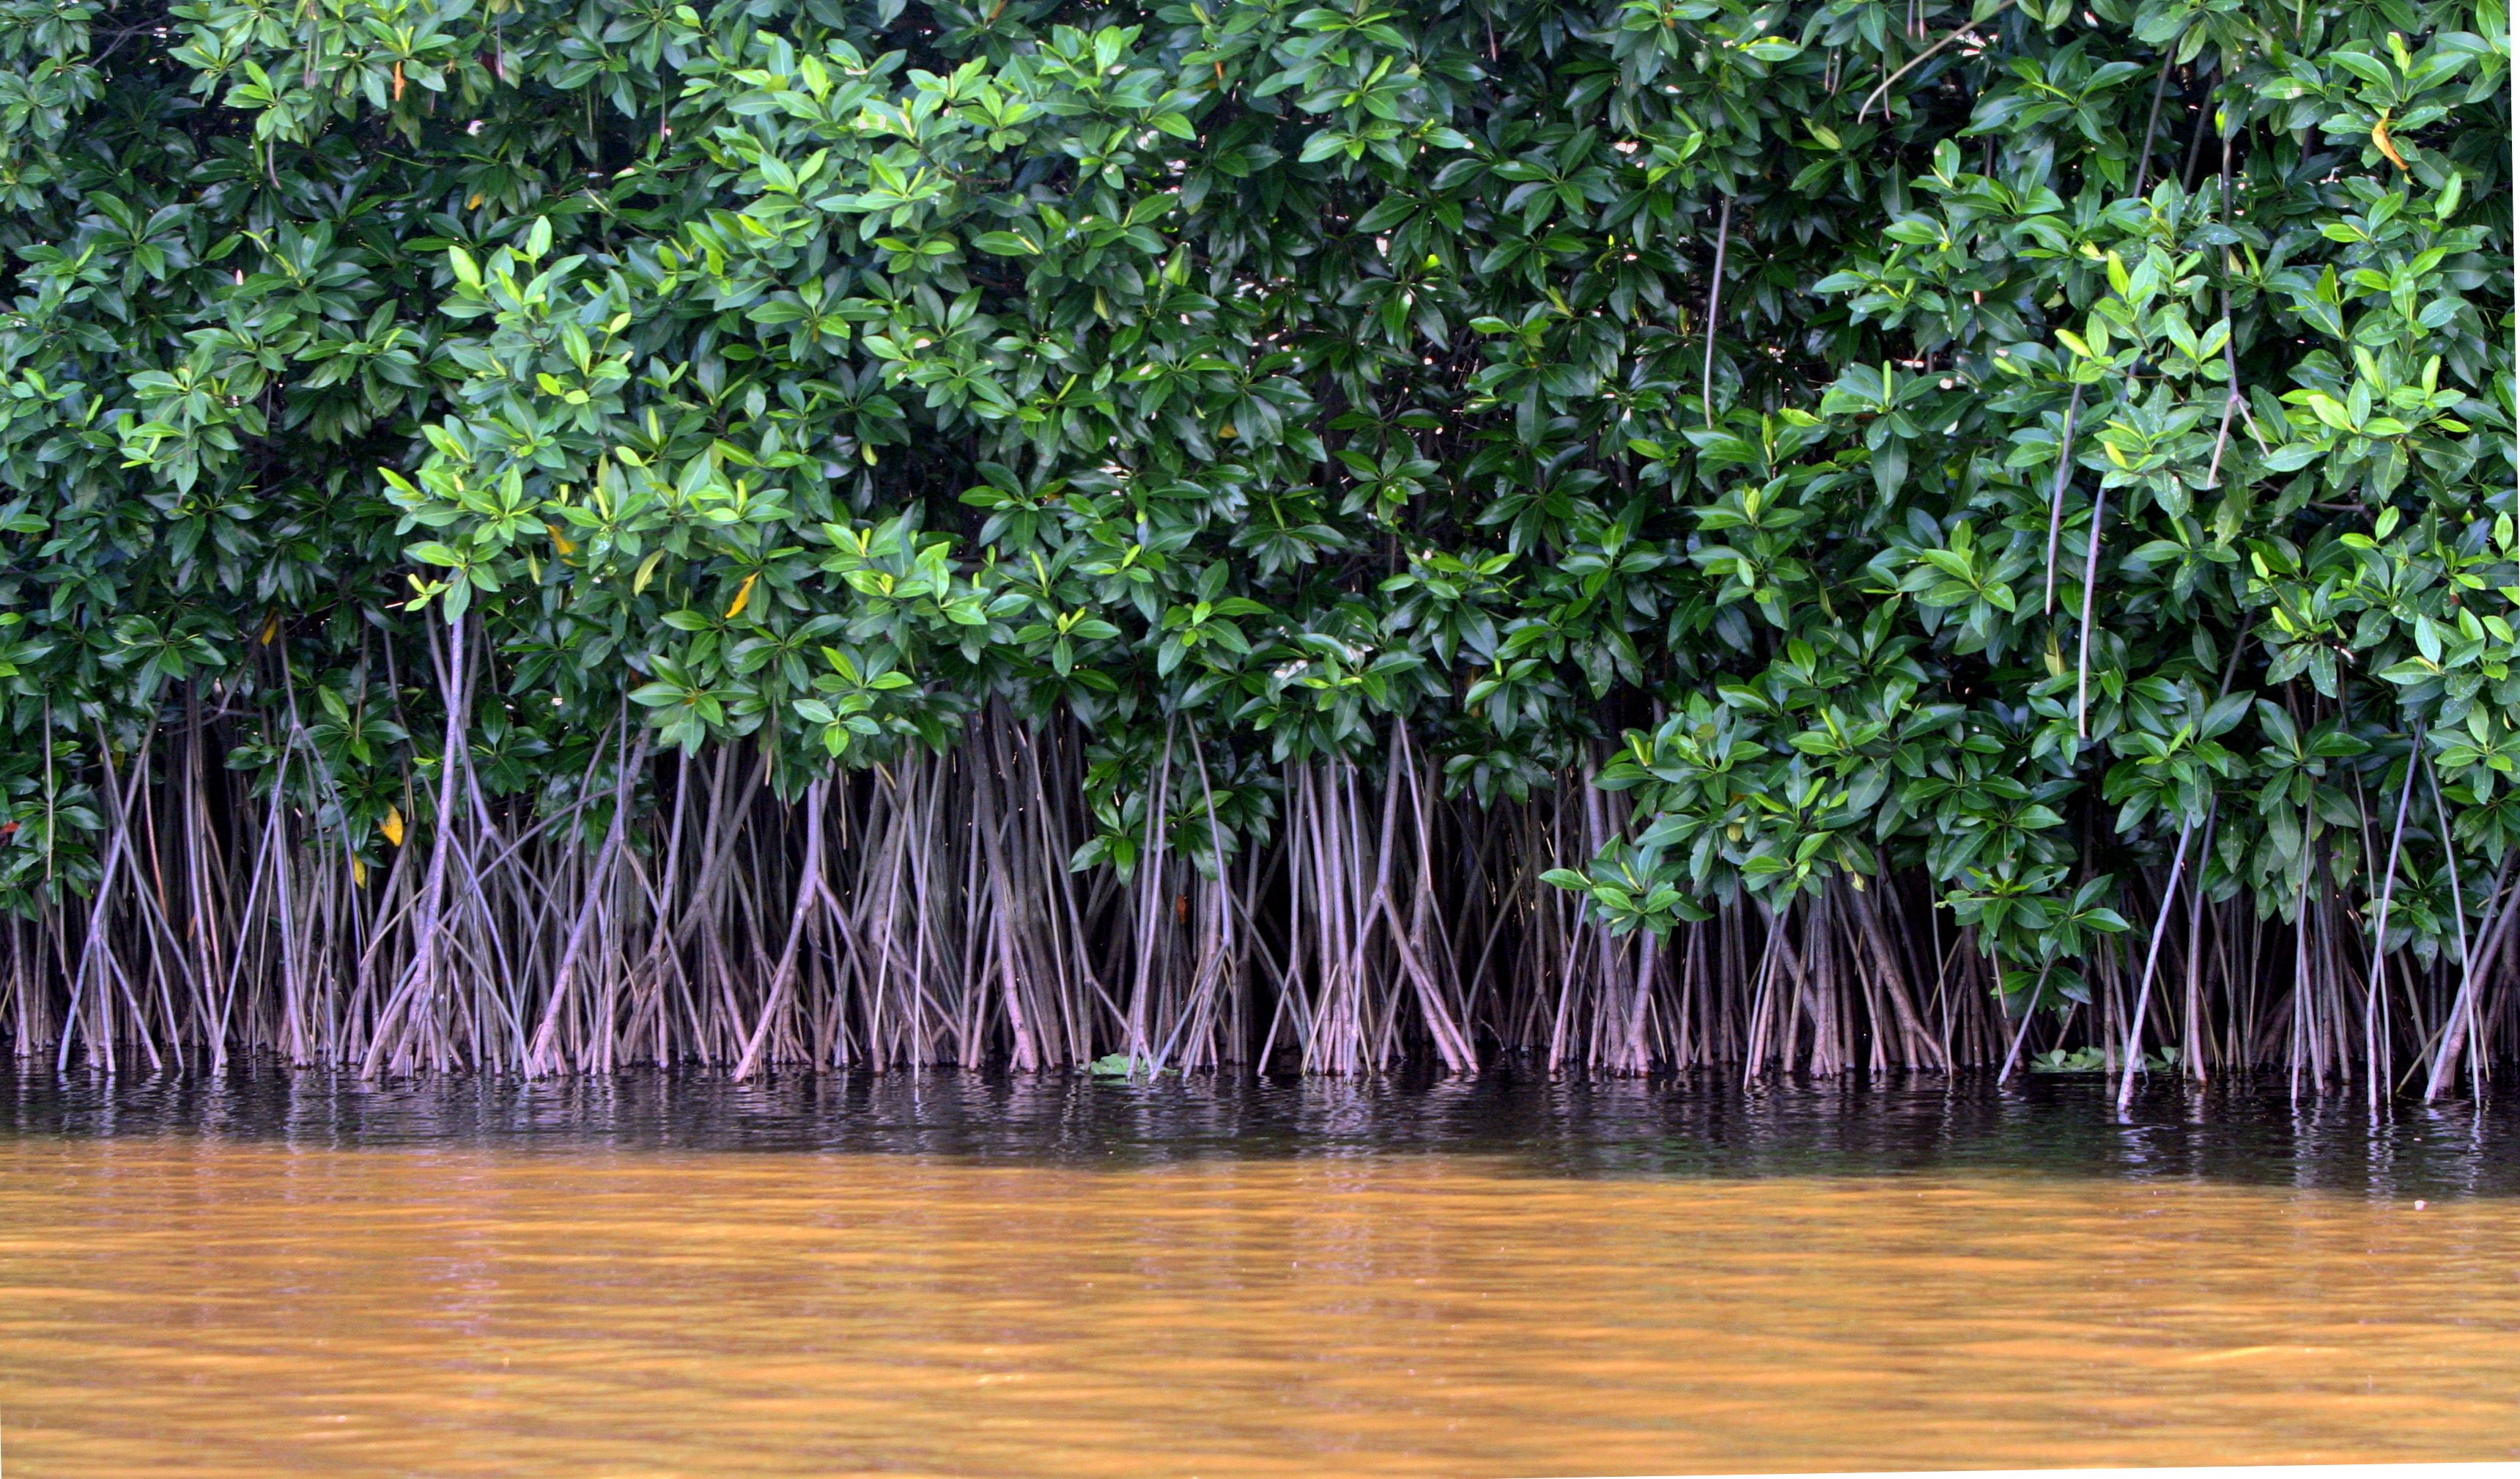 The world's mangrove forests are disappearing thanks to farming and industrial activity.